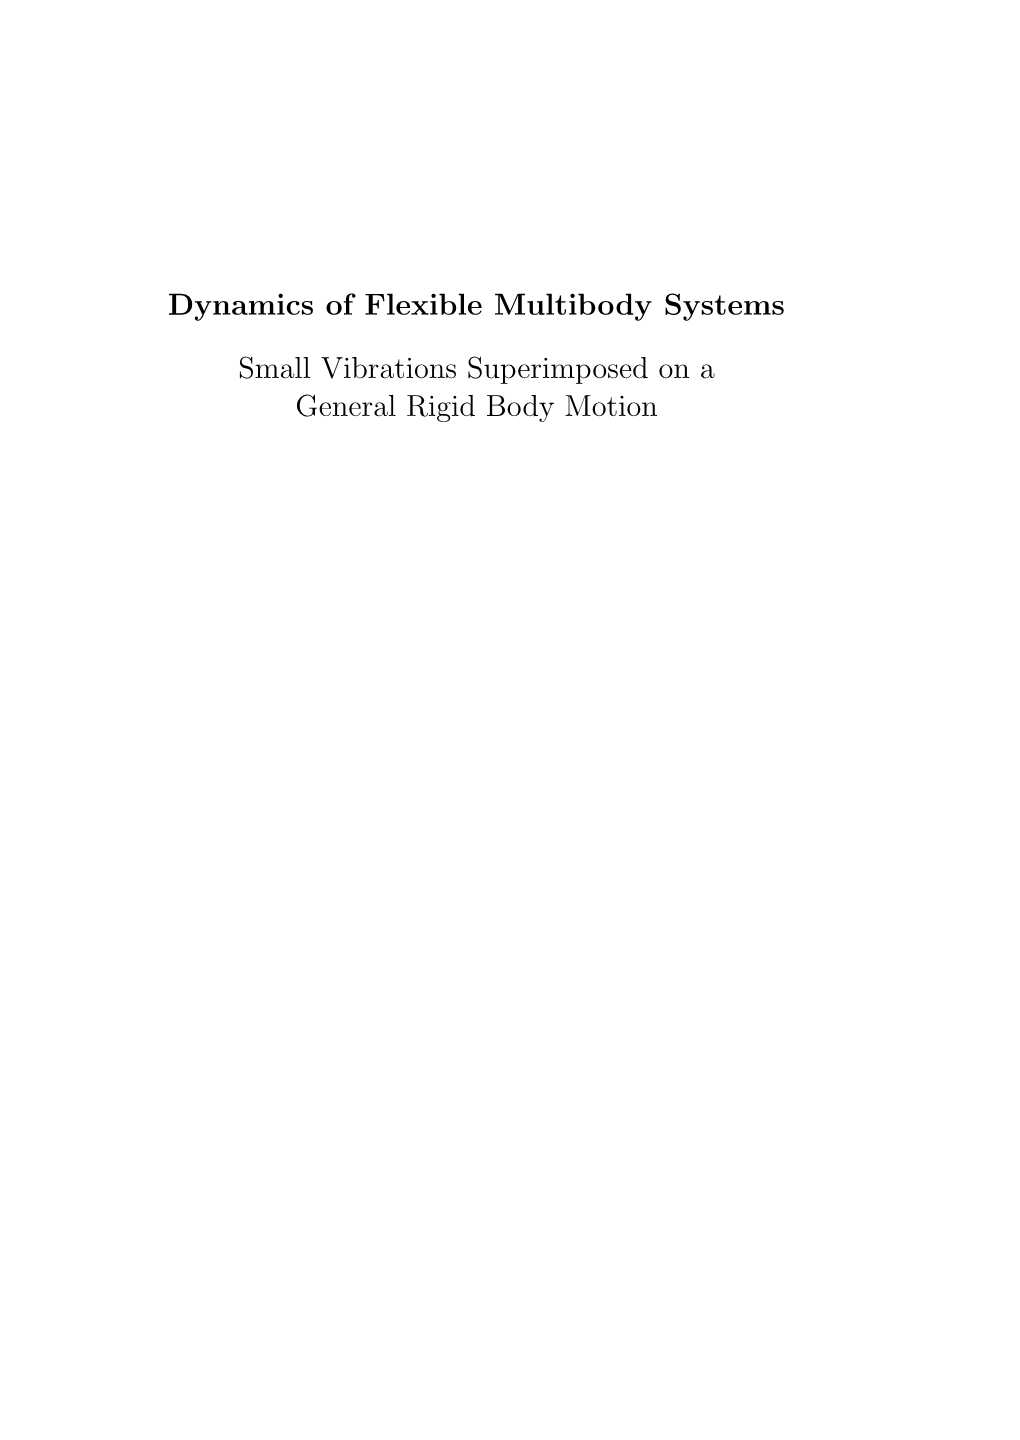 Dynamics of Flexible Multibody Systems Small Vibrations Superimposed on a General Rigid Body Motion